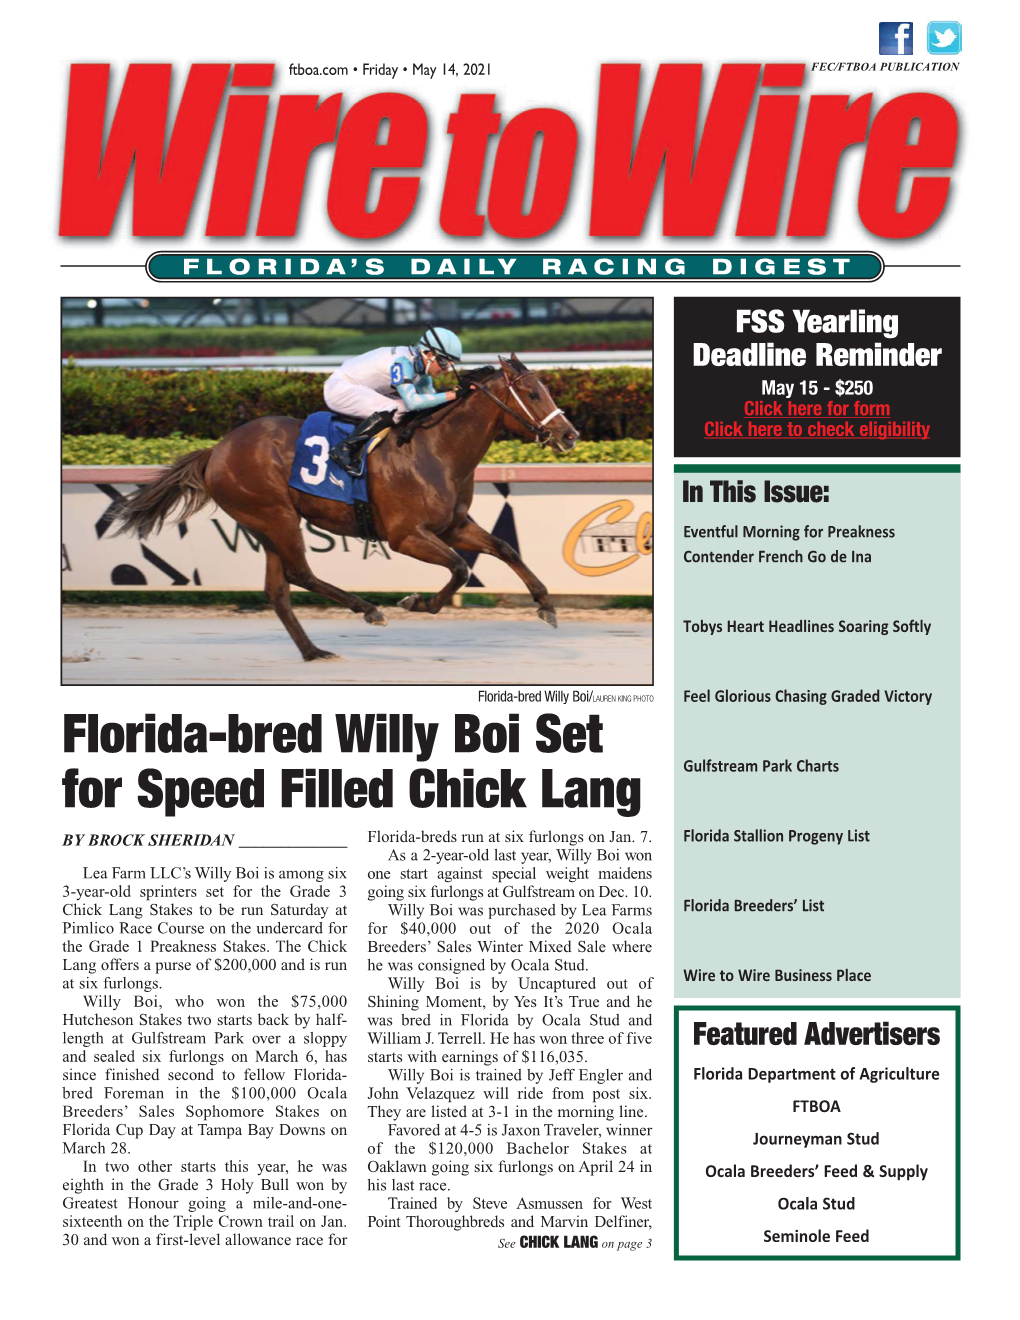 Florida-Bred Willy Boi Set for Speed Filled Chick Lang Gulfstream Park Charts